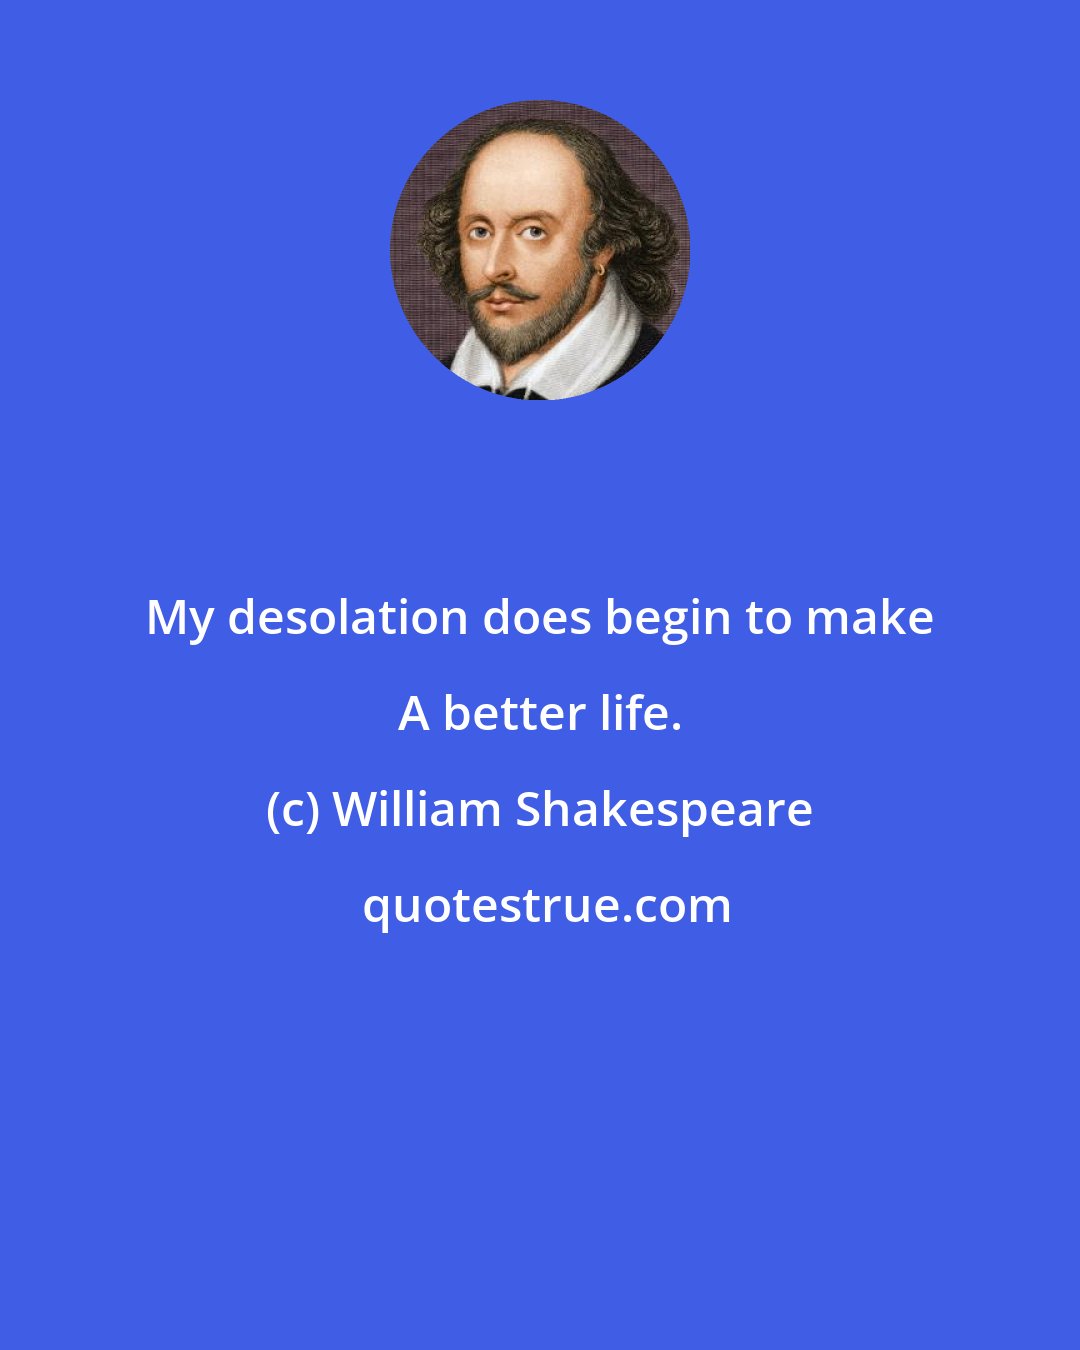 William Shakespeare: My desolation does begin to make A better life.